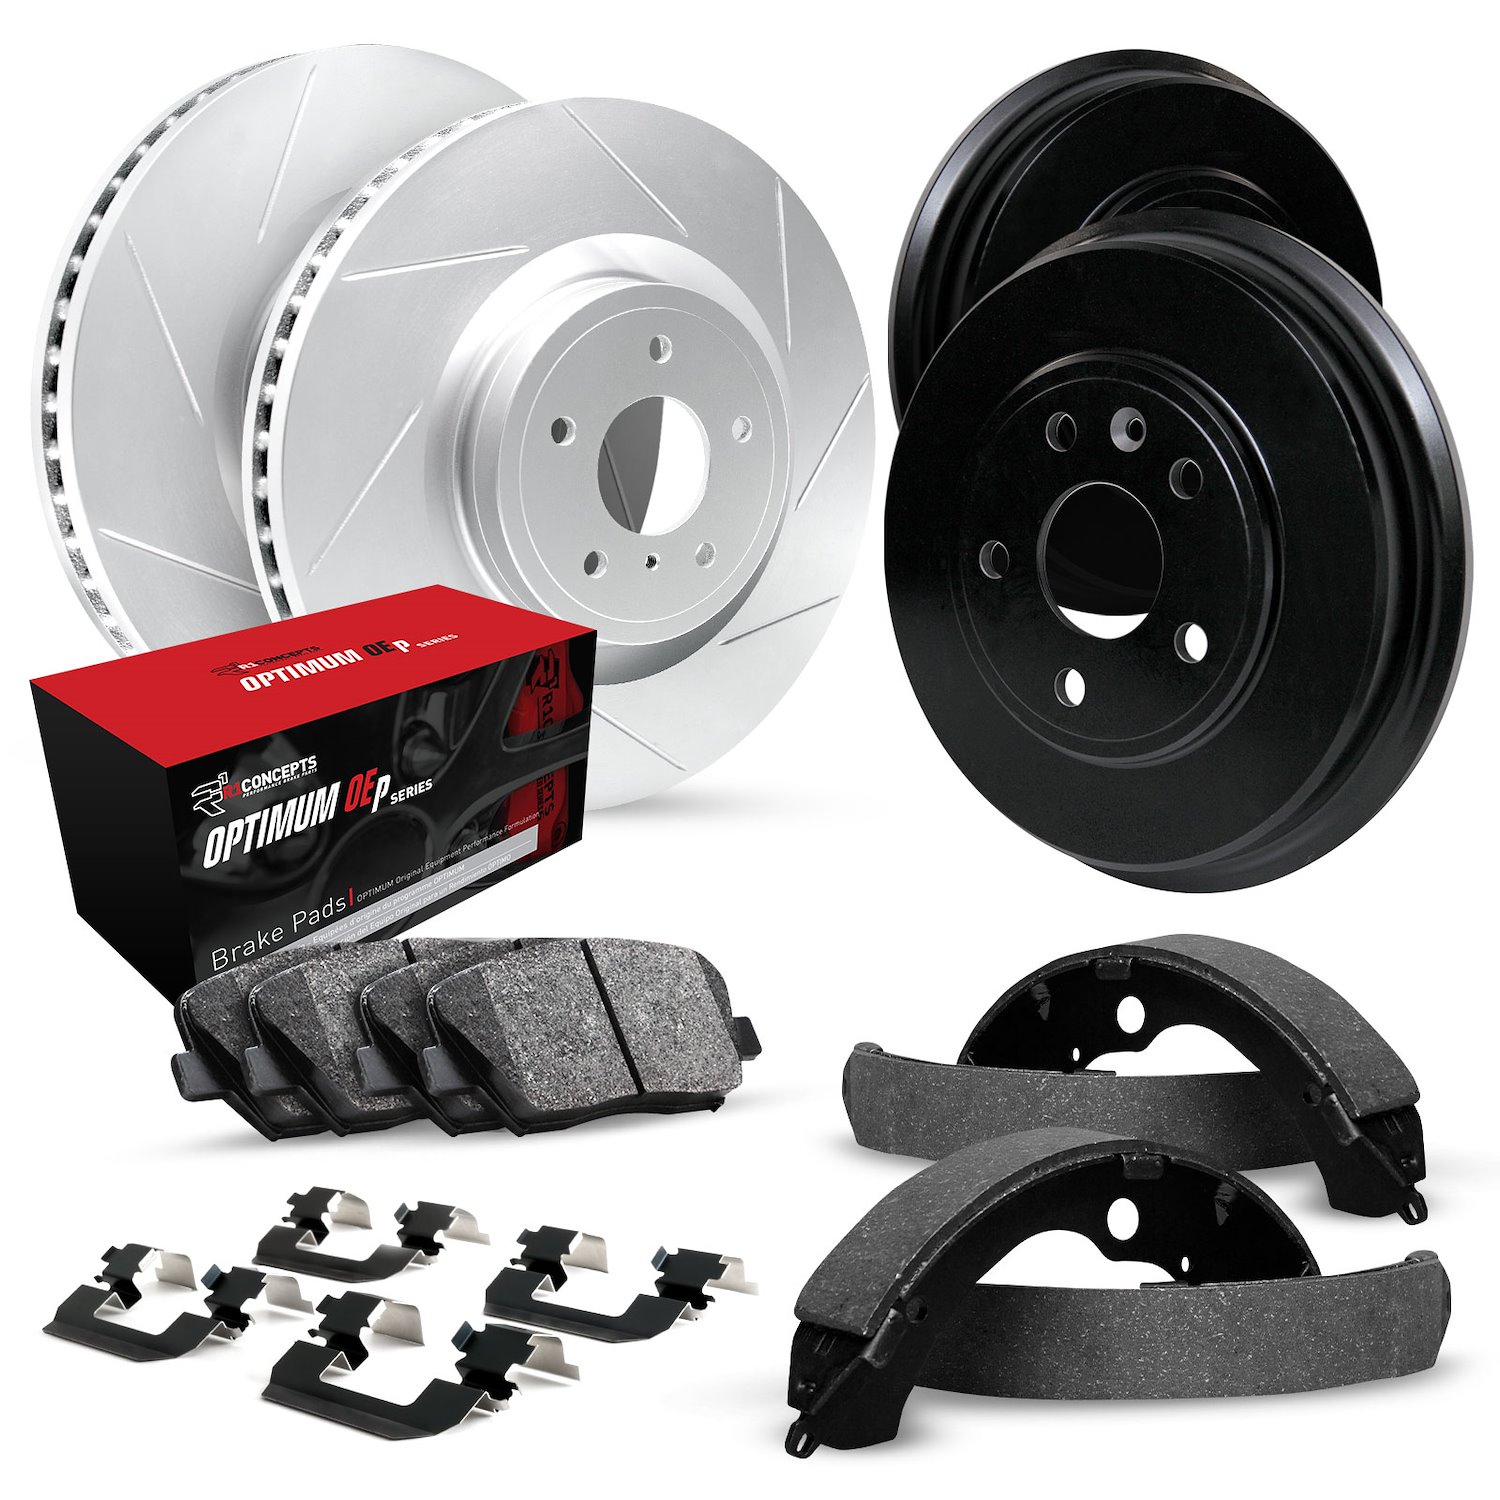 GEO-Carbon Slotted Brake Rotor & Drum Set w/Optimum OE Pads, Shoes, & Hardware, 1983-1989 Ford/Lincoln/Mercury/Mazda